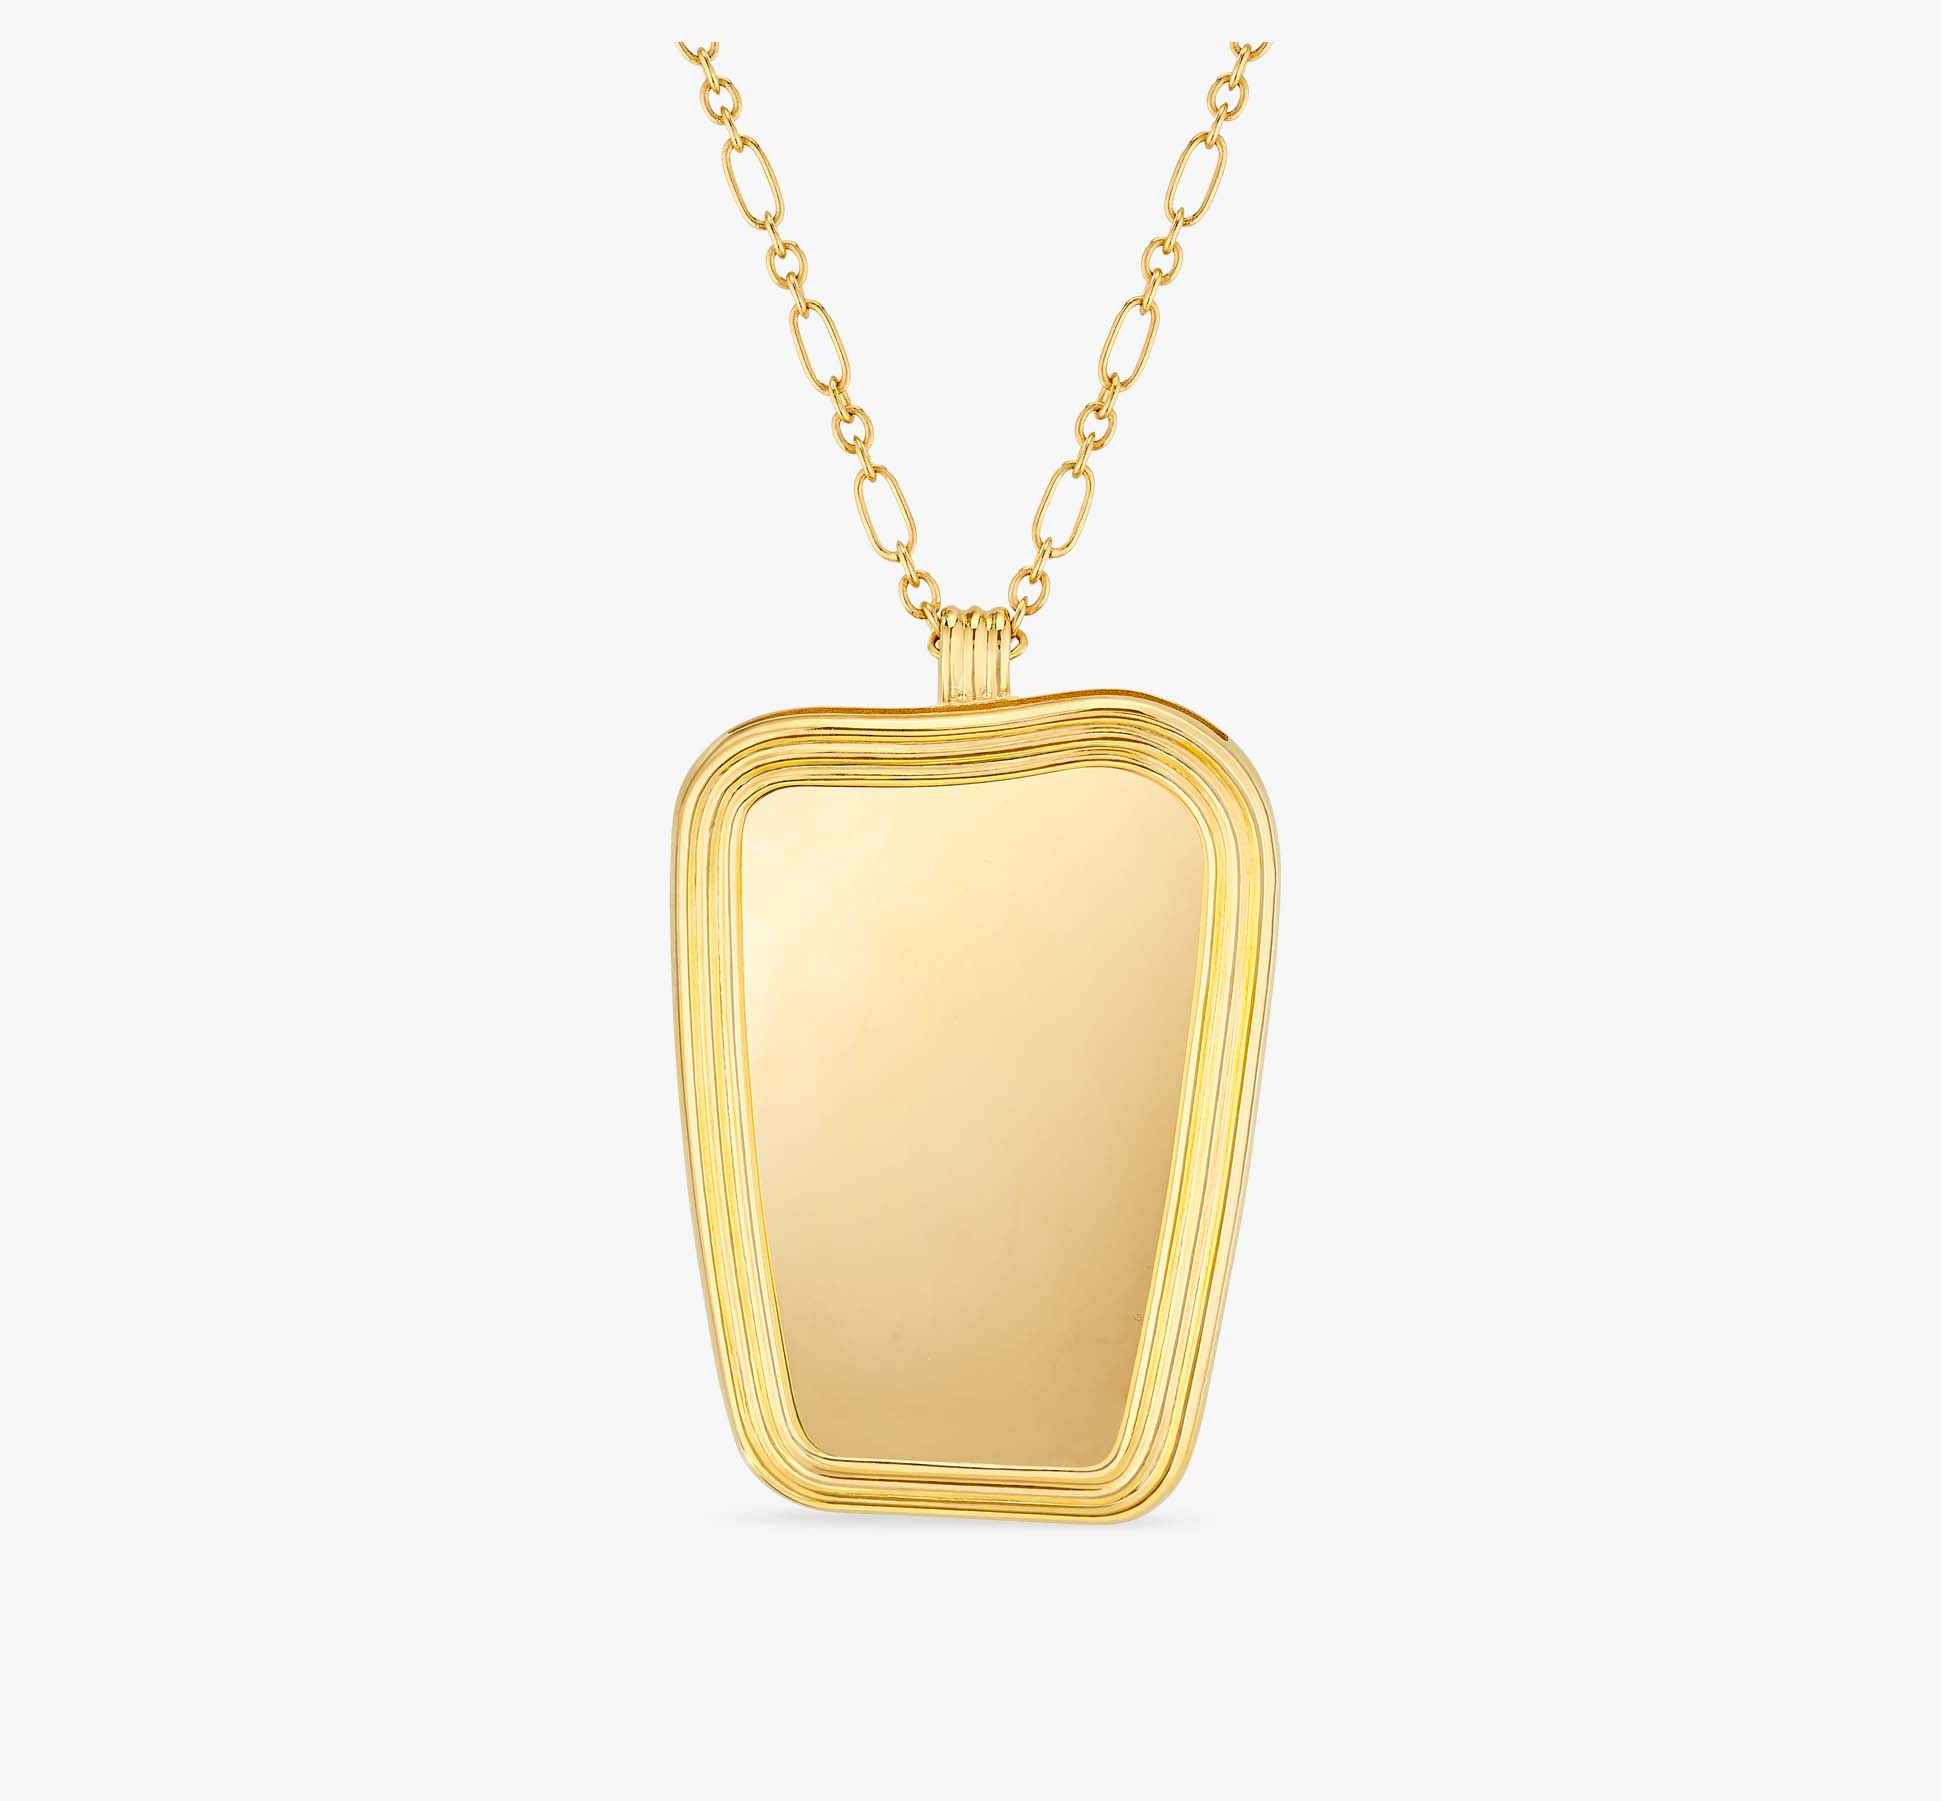 Organica Golden brass with fine gold necklace